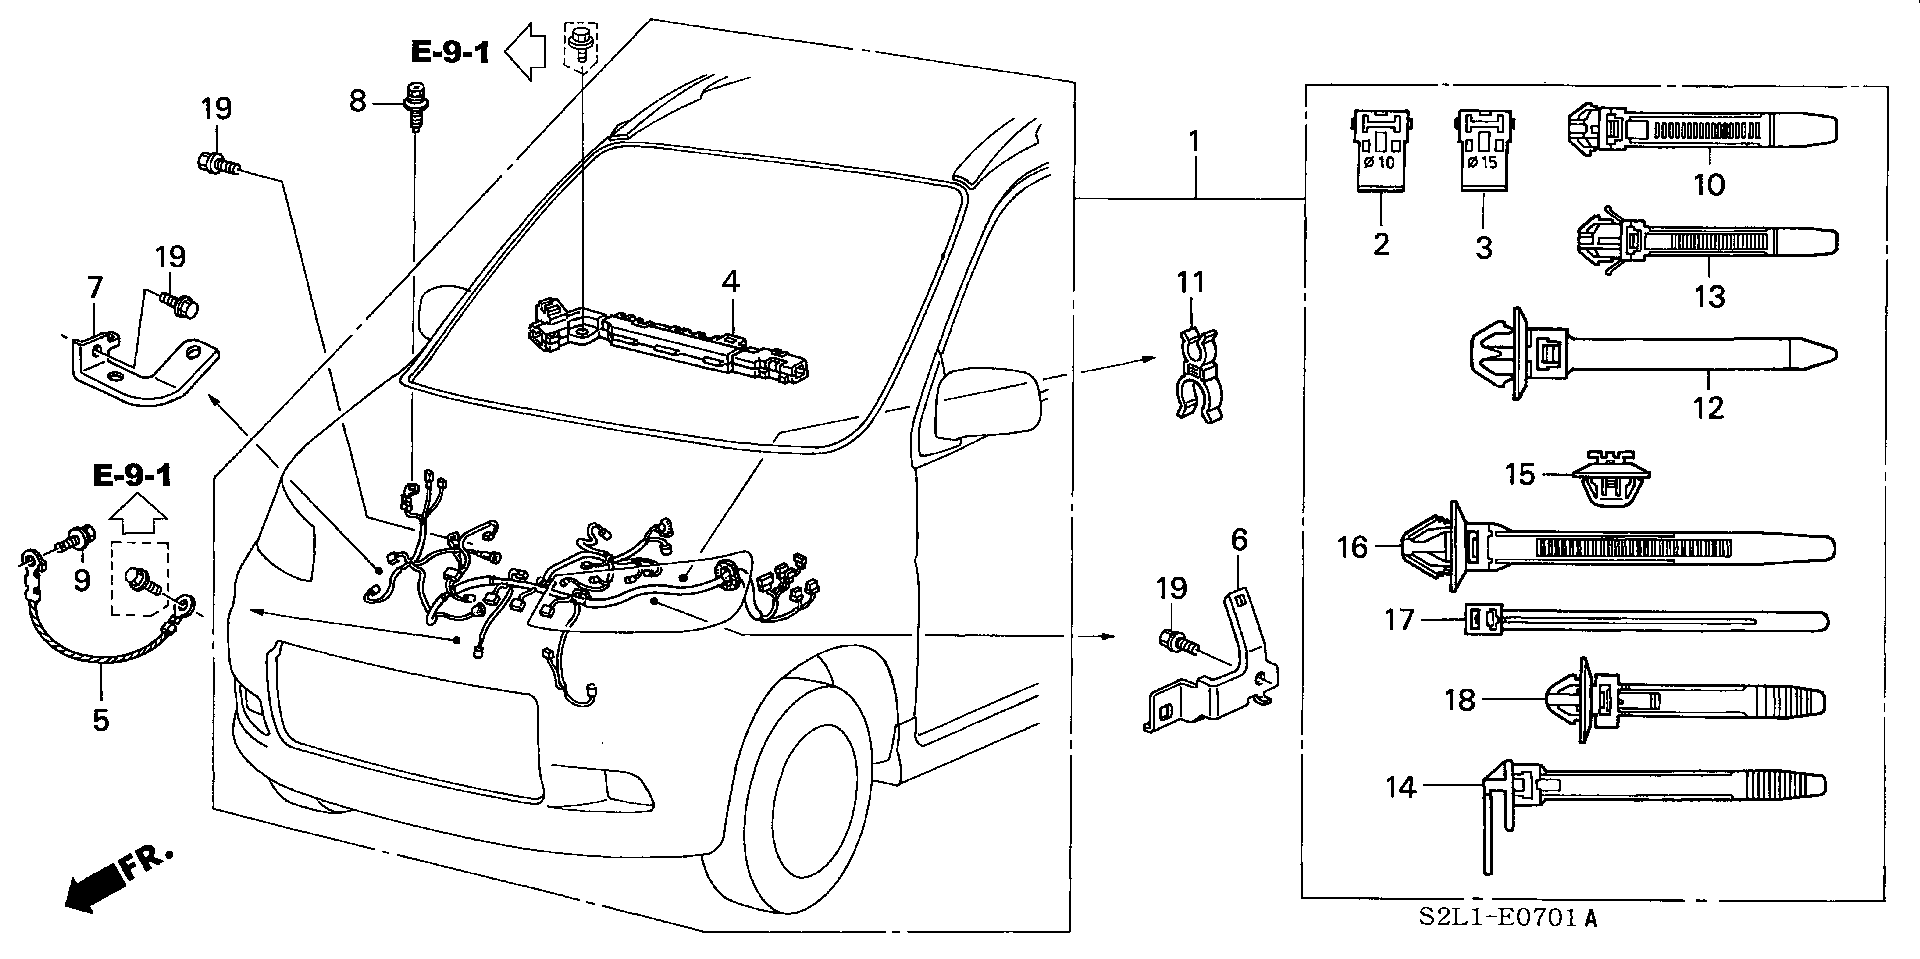 ENGINE WIRE HARNESS (LIFE DUNK)